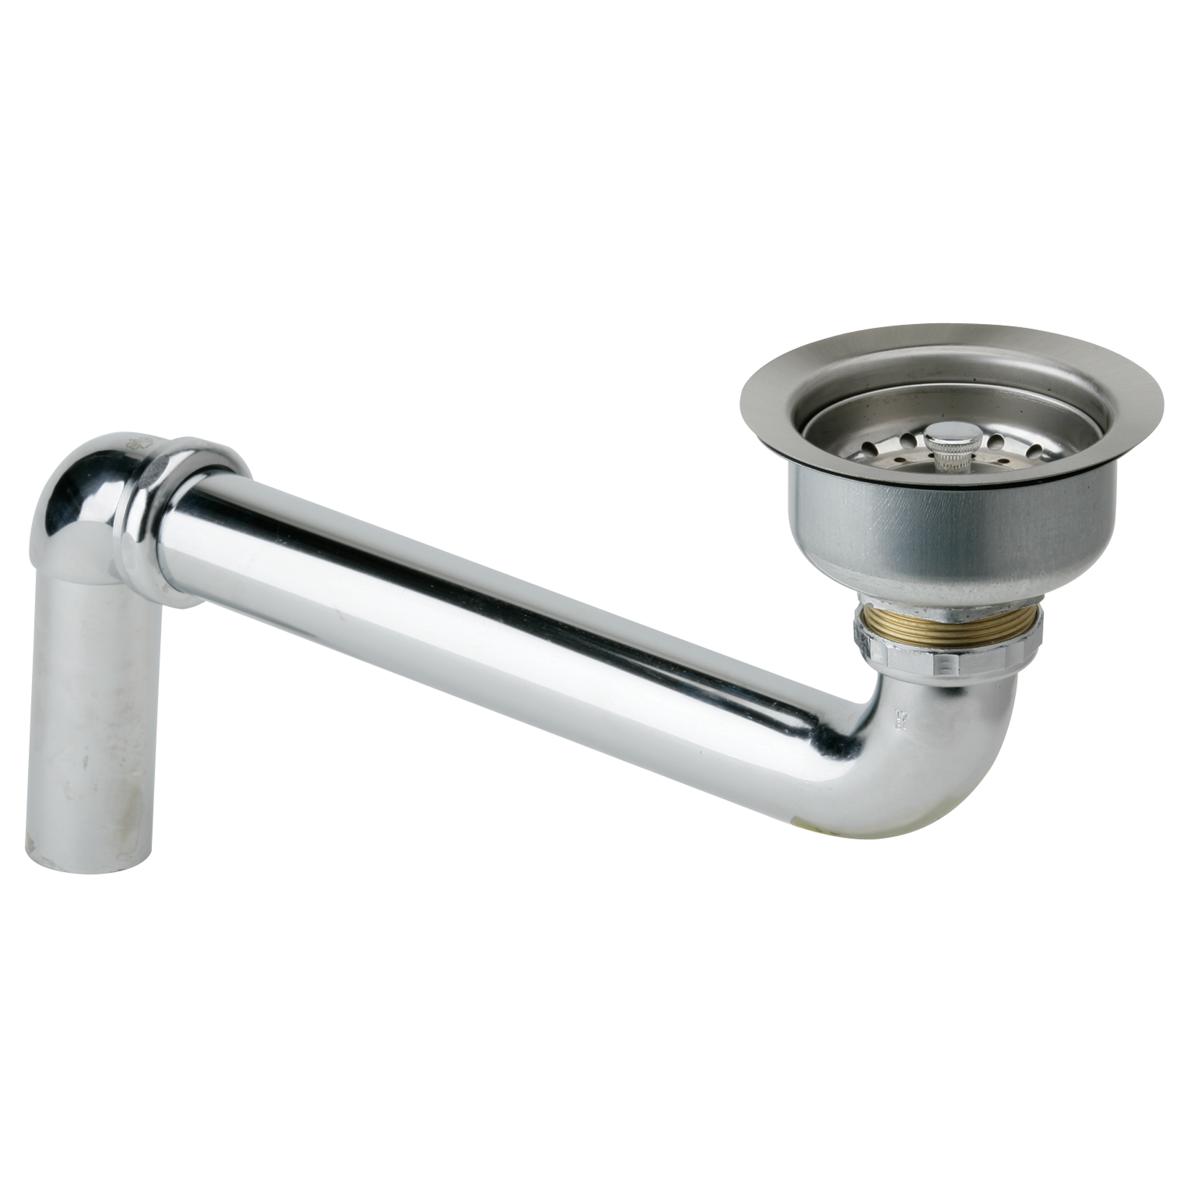 Elkay Strainer Basket And Offset Tailpiece 3-1/2" Drain Fitting" Stainless Steel Body 1261617